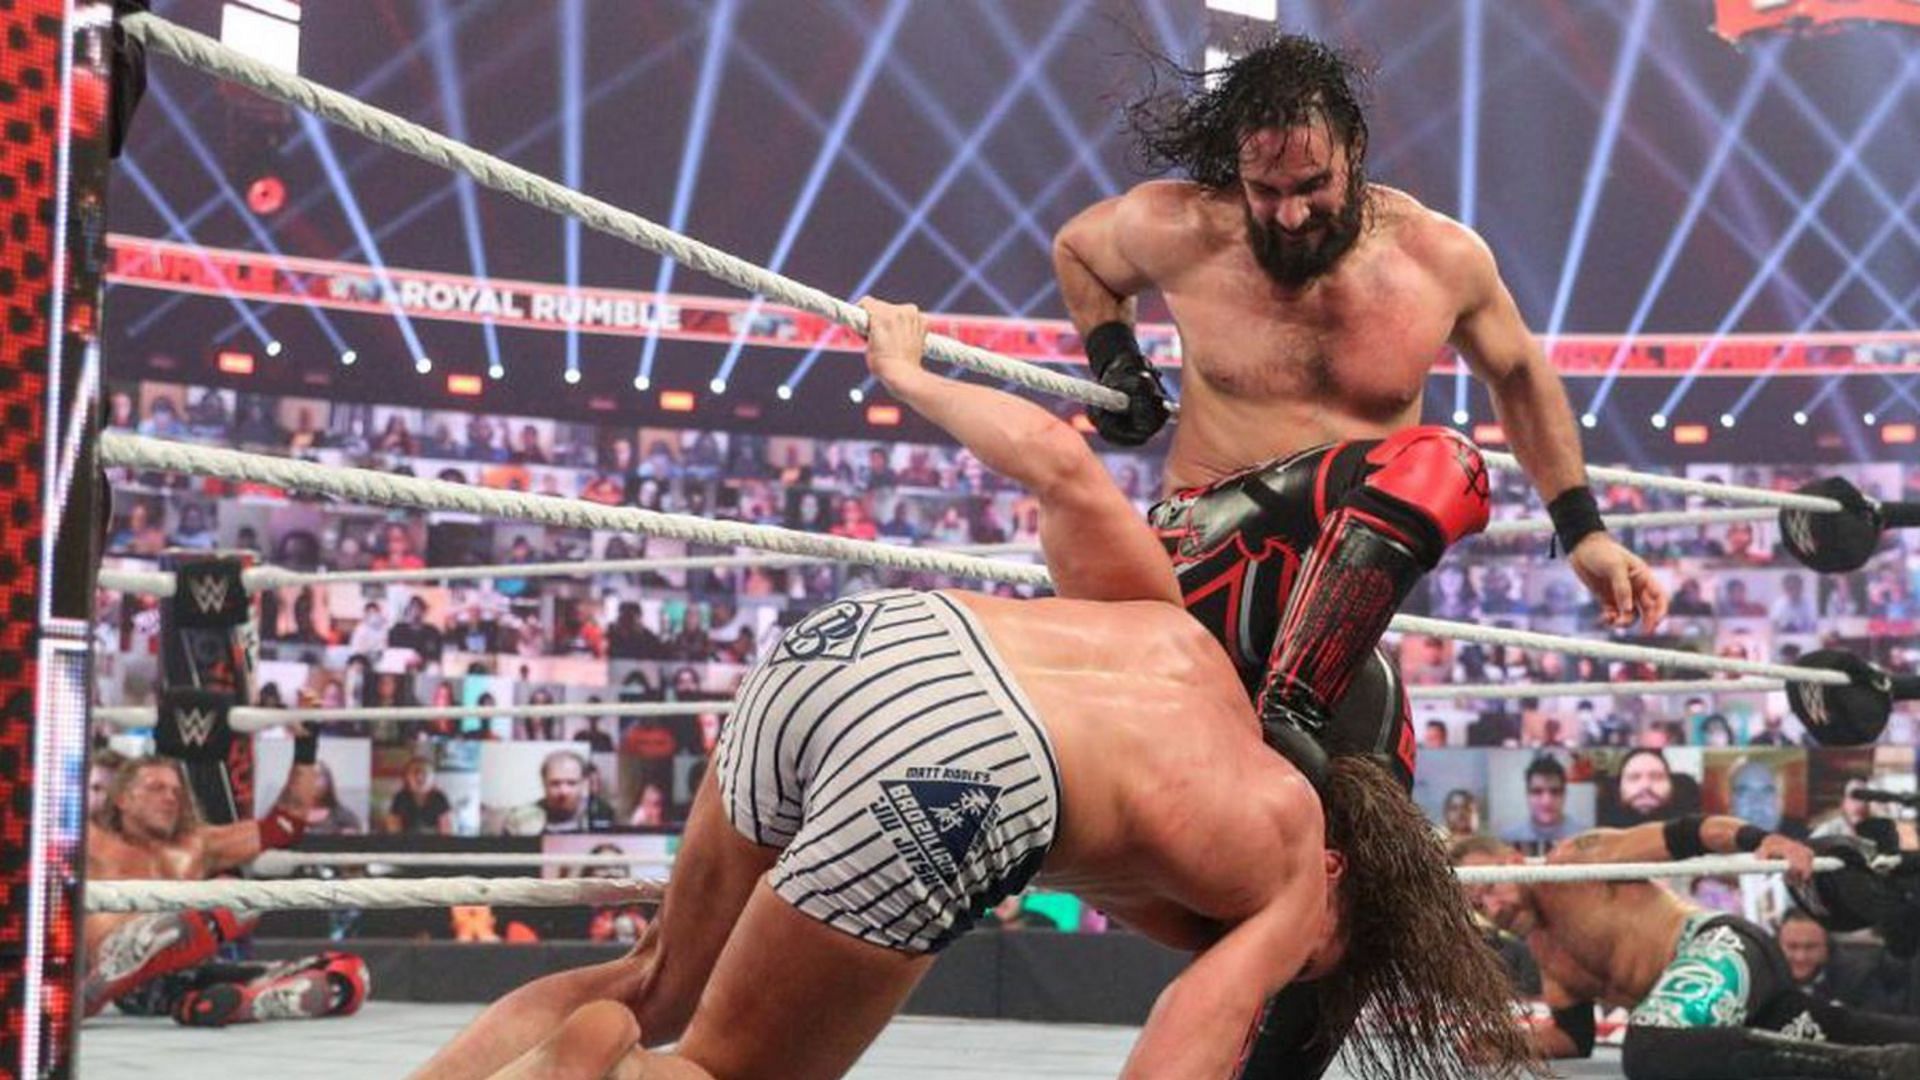 Seth Rollins initially did not want to work with Riddle